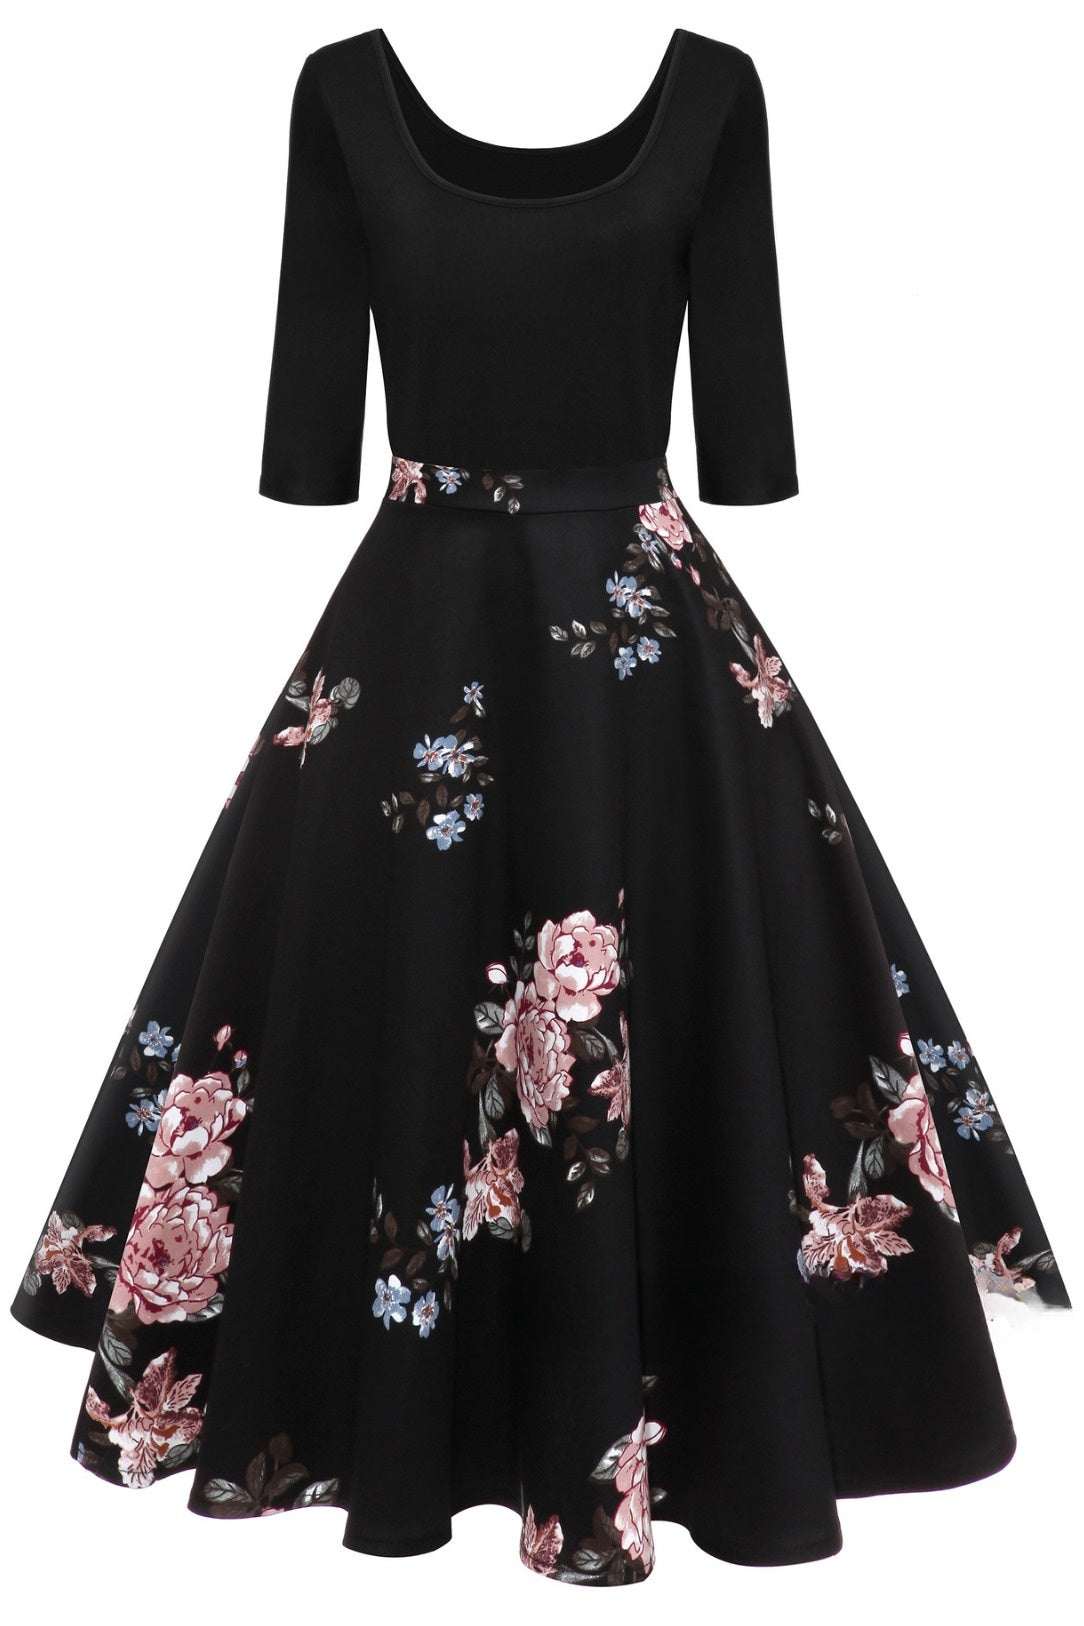 5 Styles of 1/2 Sleeves A-line Floral Vintage Dress